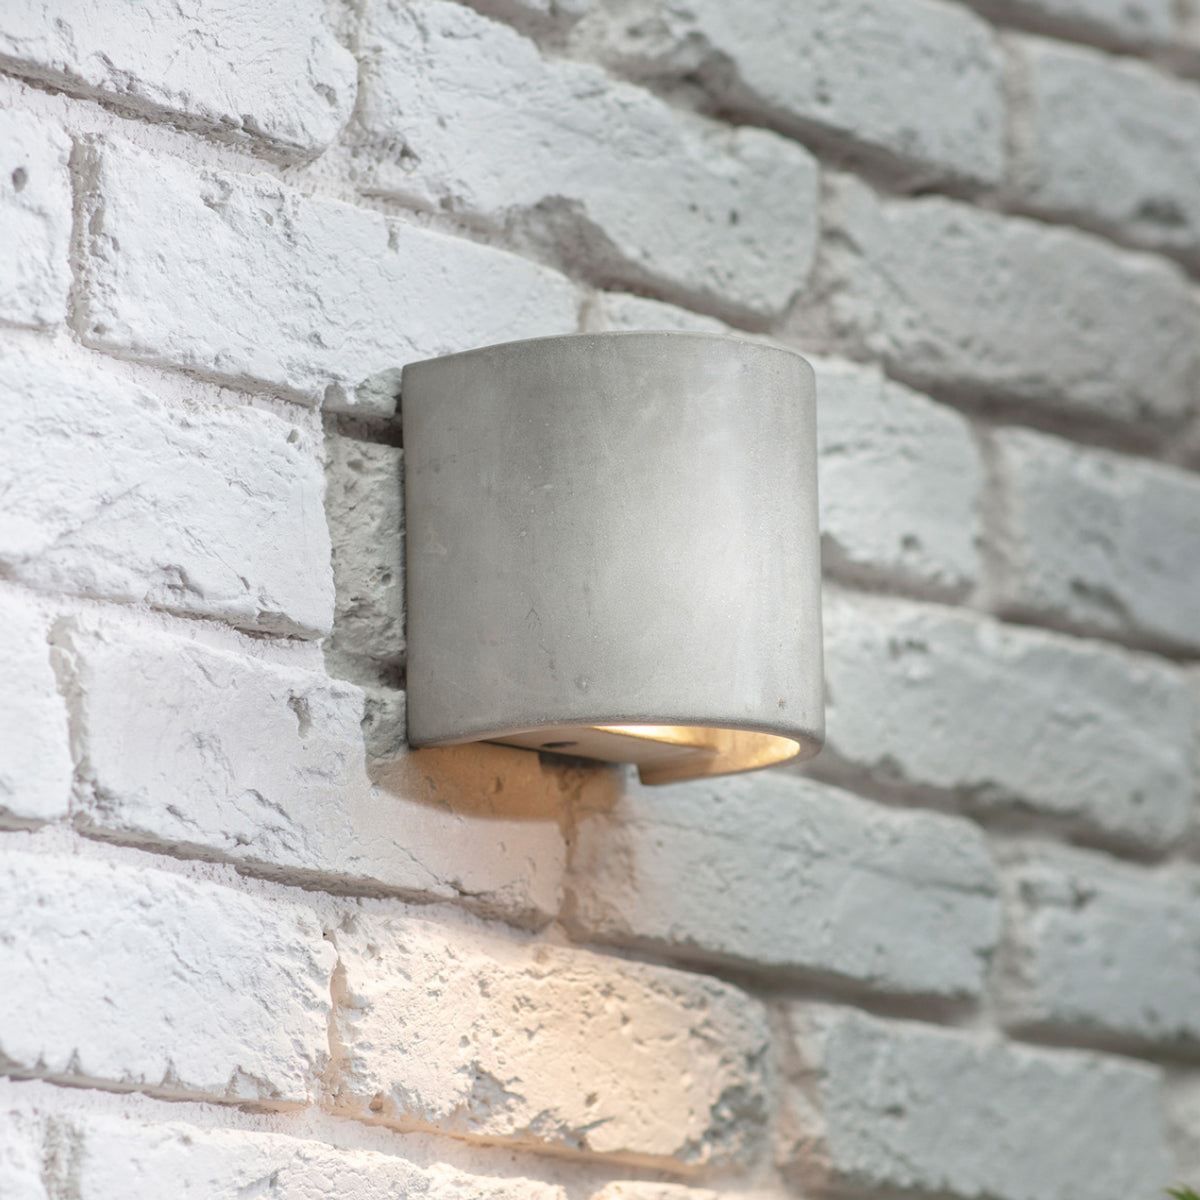 Kew Wall Light - July Delivery